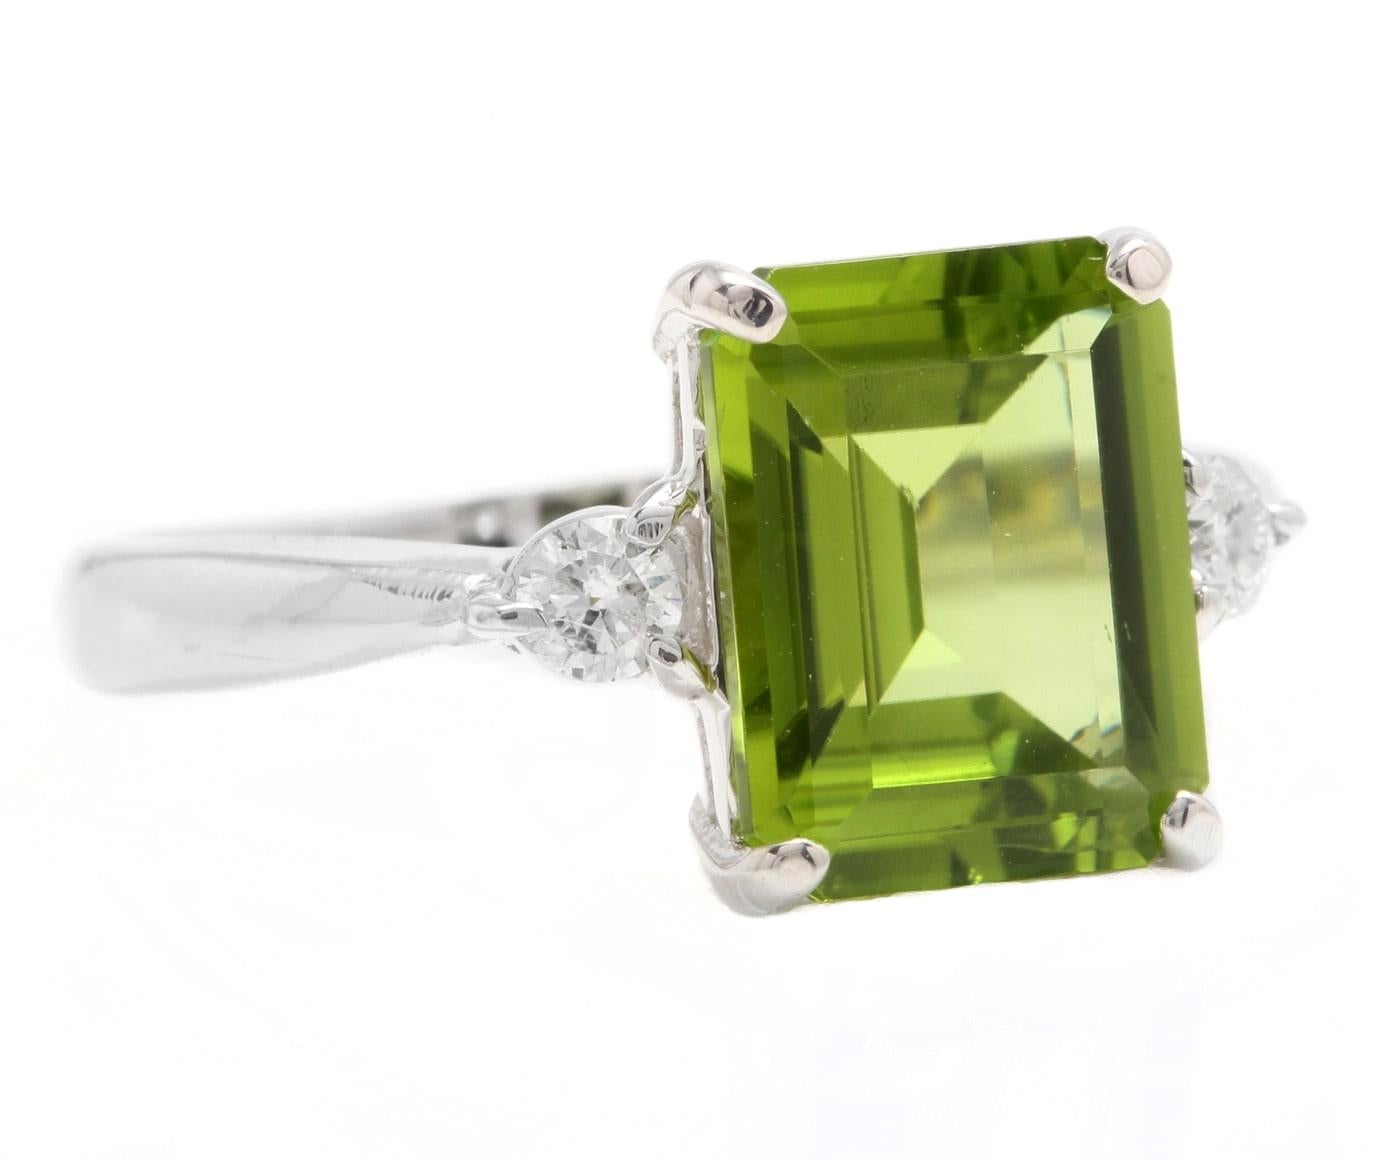 3.18 Carats Natural Very Nice Looking Peridot and Diamond 14K Solid White Gold Ring

Stamped: 14K

Suggested Replacement Value: Approx. $3,500.00

Total Natural Emerald Cut Peridot Weight is: Approx. 3.00 Carats 

Peridot Measures: Approx. 10 x